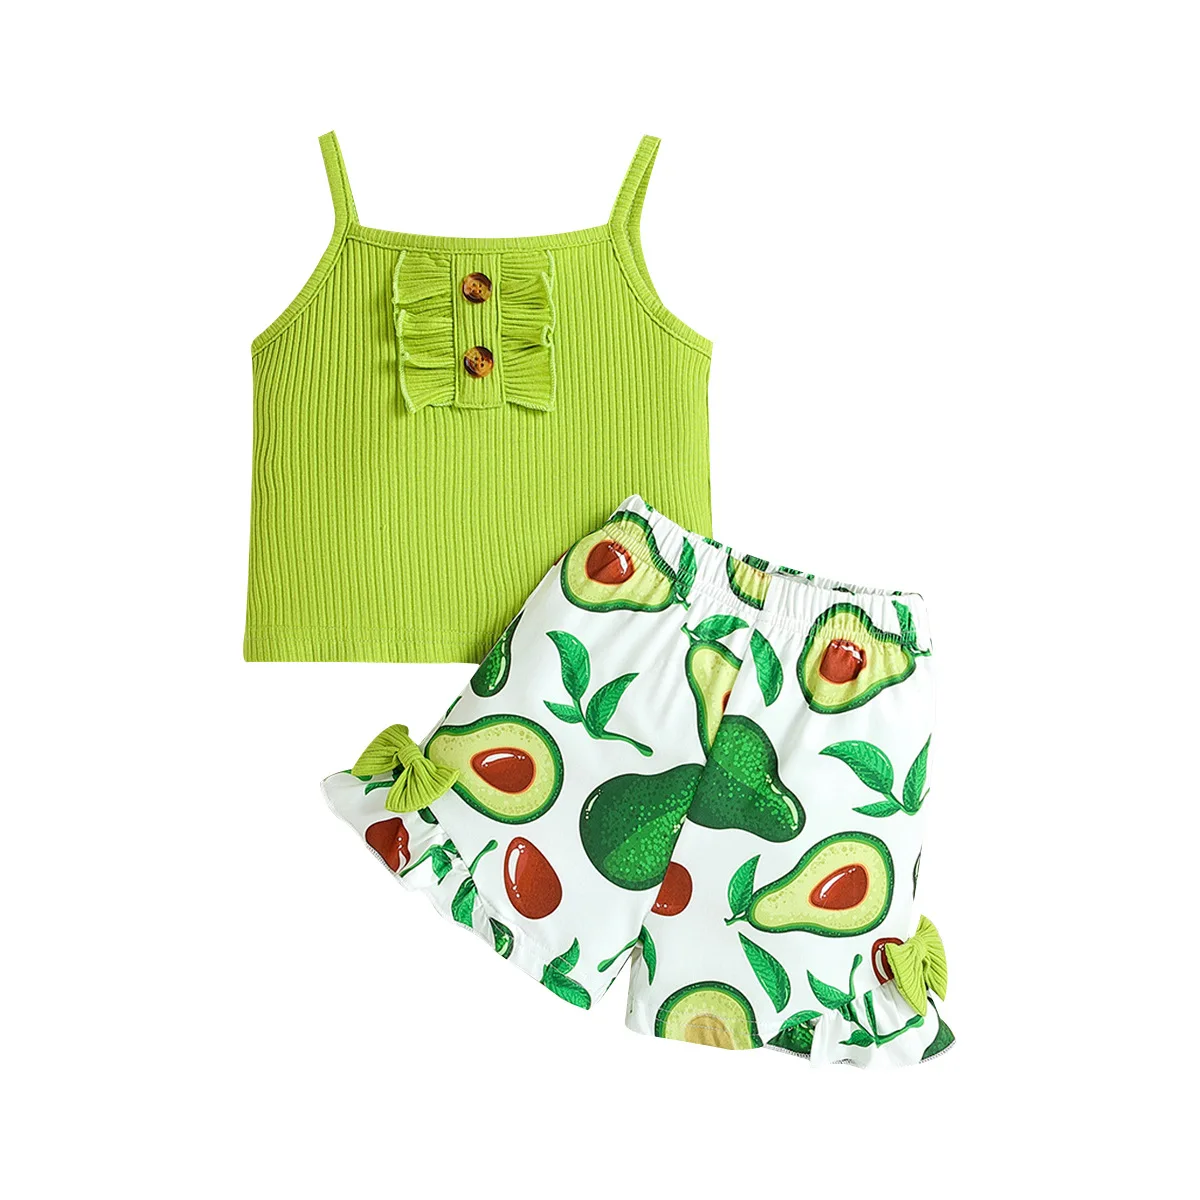 INS fashion toddler girls summer clothing sets sleeveless vest tops+avocado shorts boutique outfits for kids